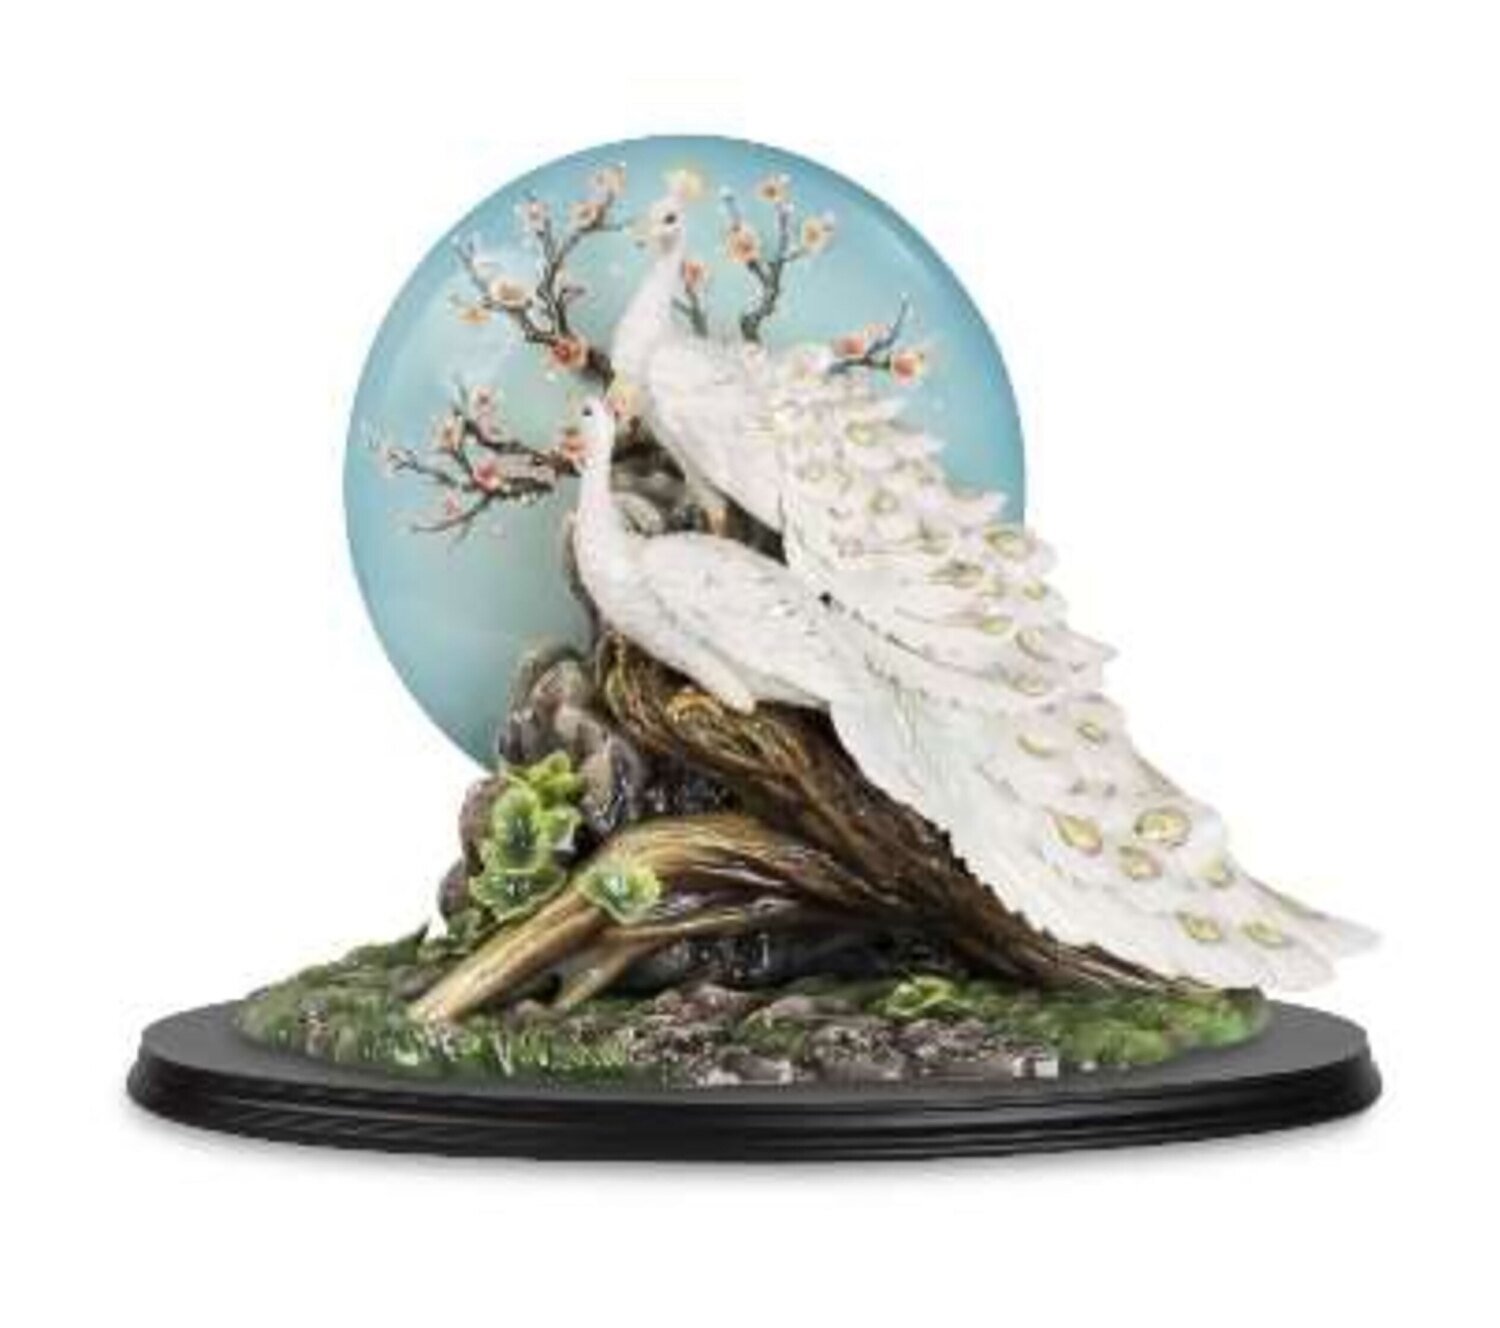 Franz Porcelain Happiness And Reunion White Peacock Design Sculptured Porcelain Figurine With Wooden Base FZ03930